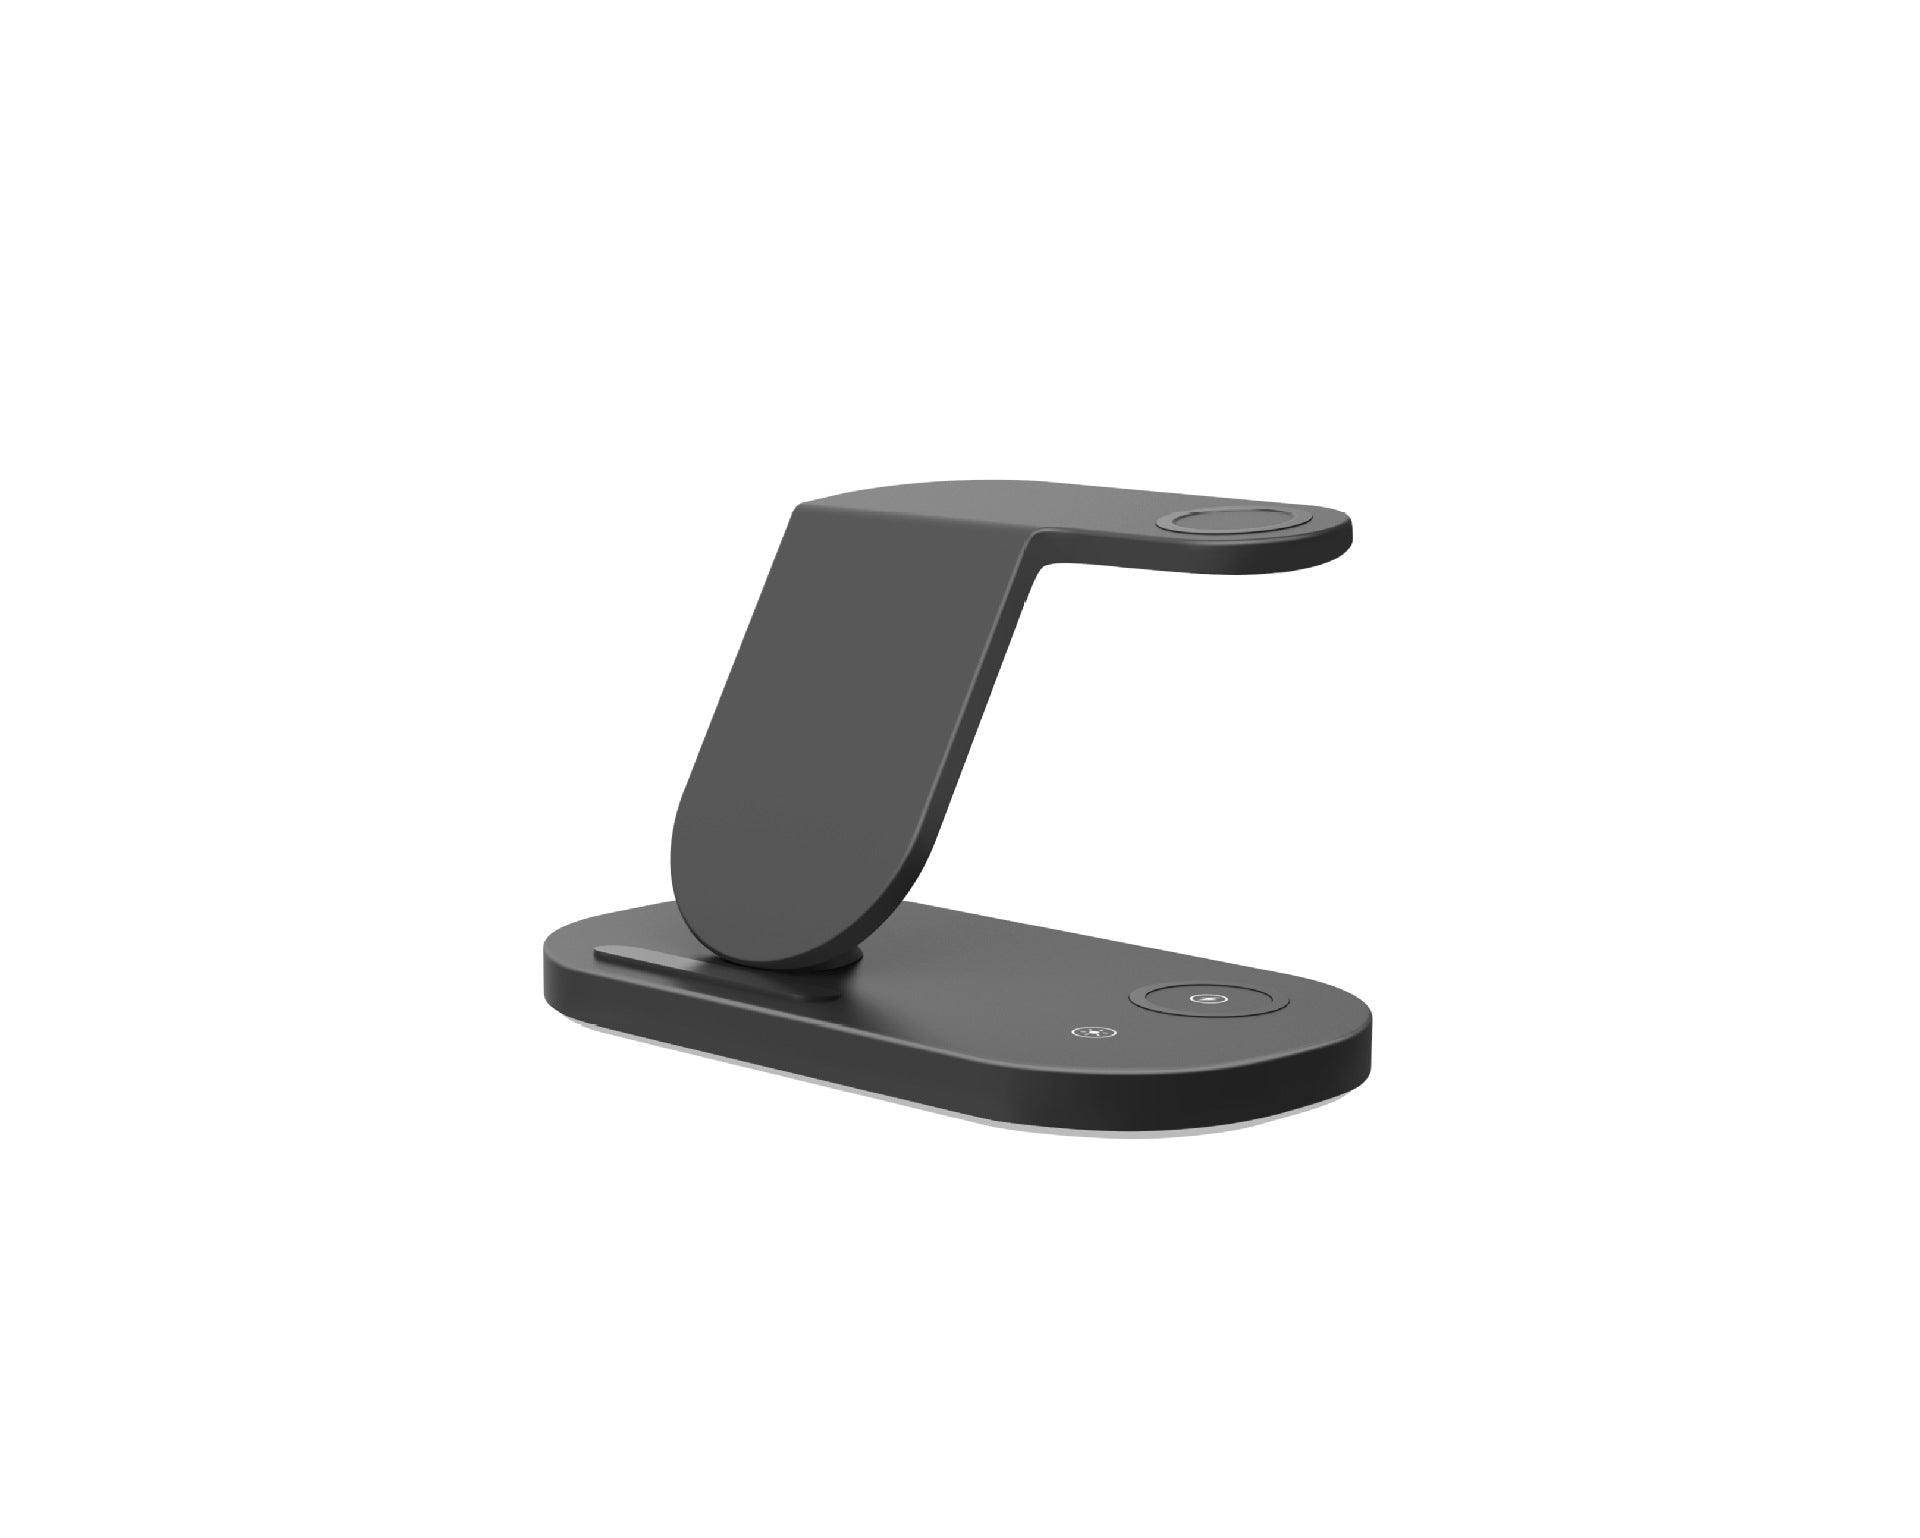 Three In One Wireless Charging Stand For Fast Charging - BUNNY BAZAR